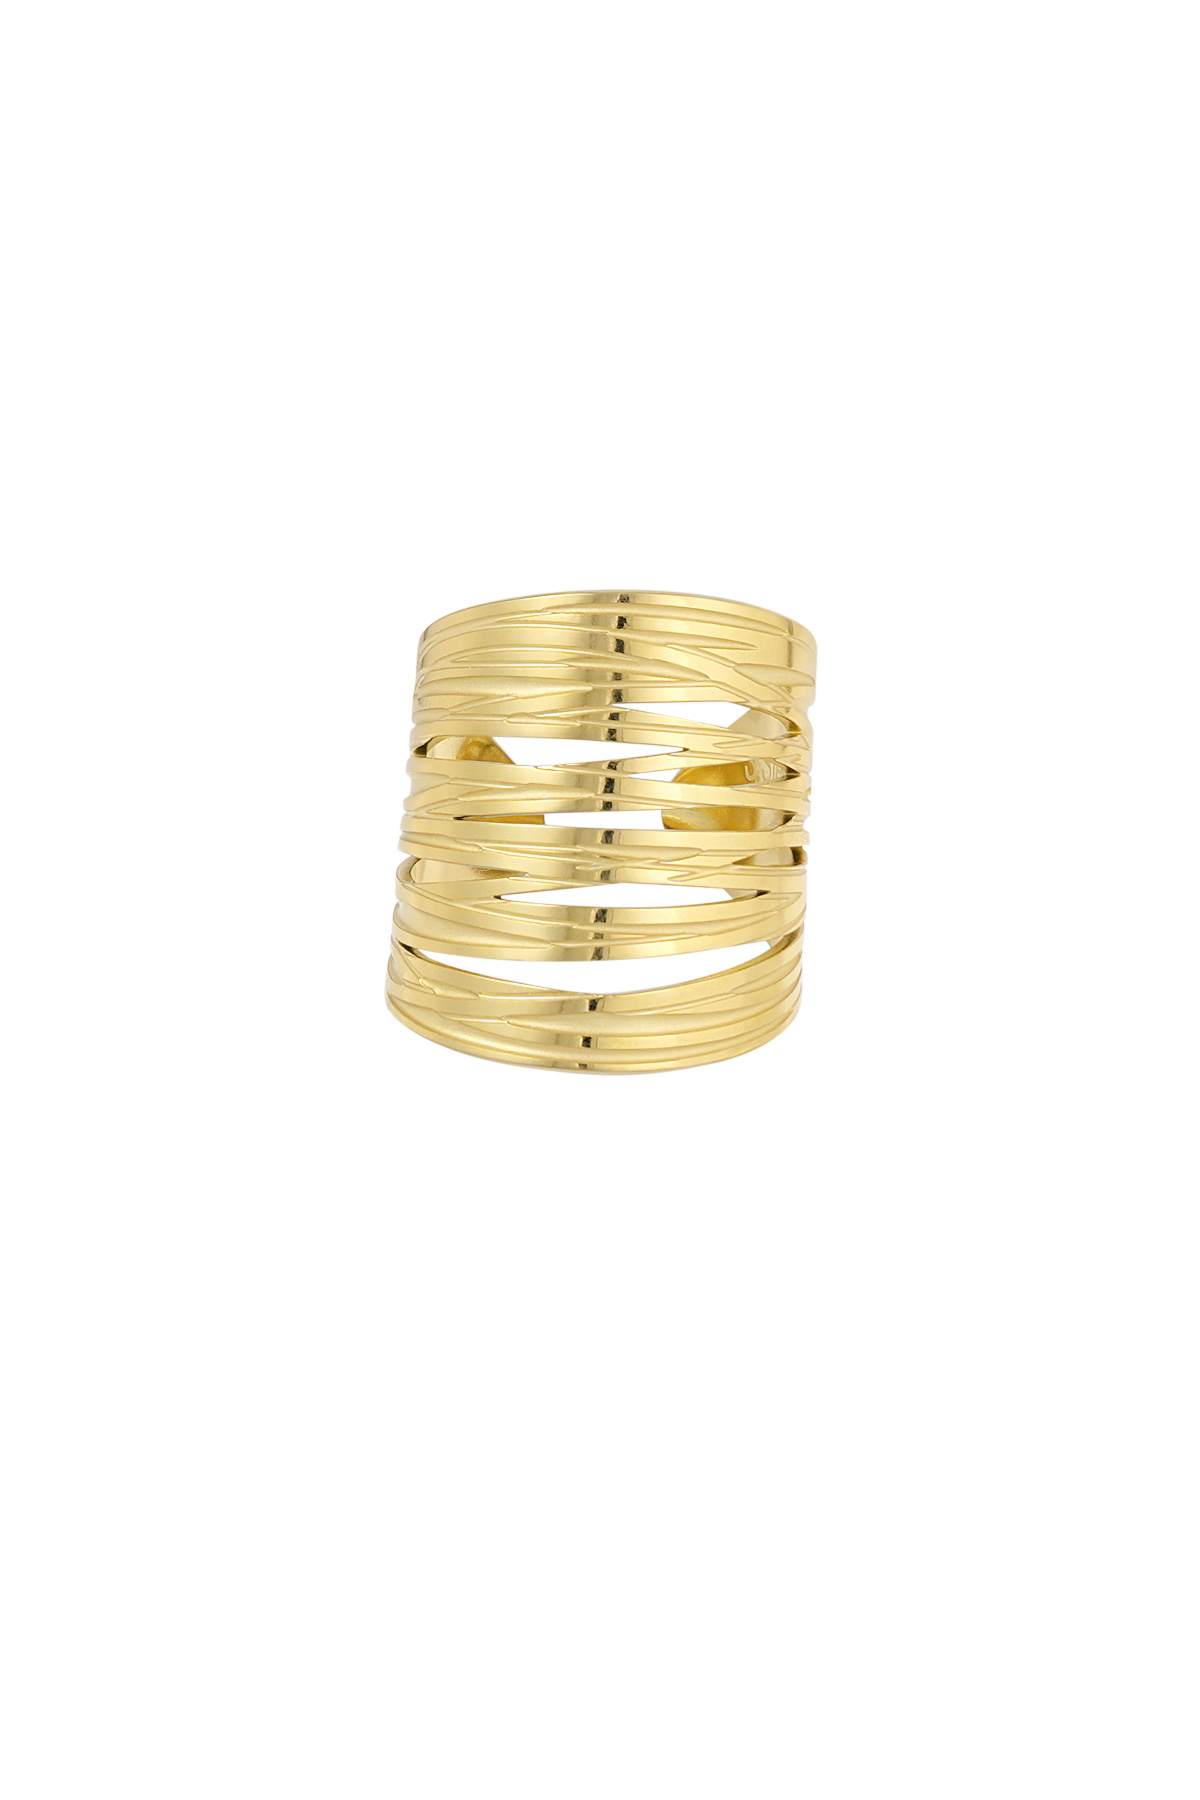 Long statement open ring - gold